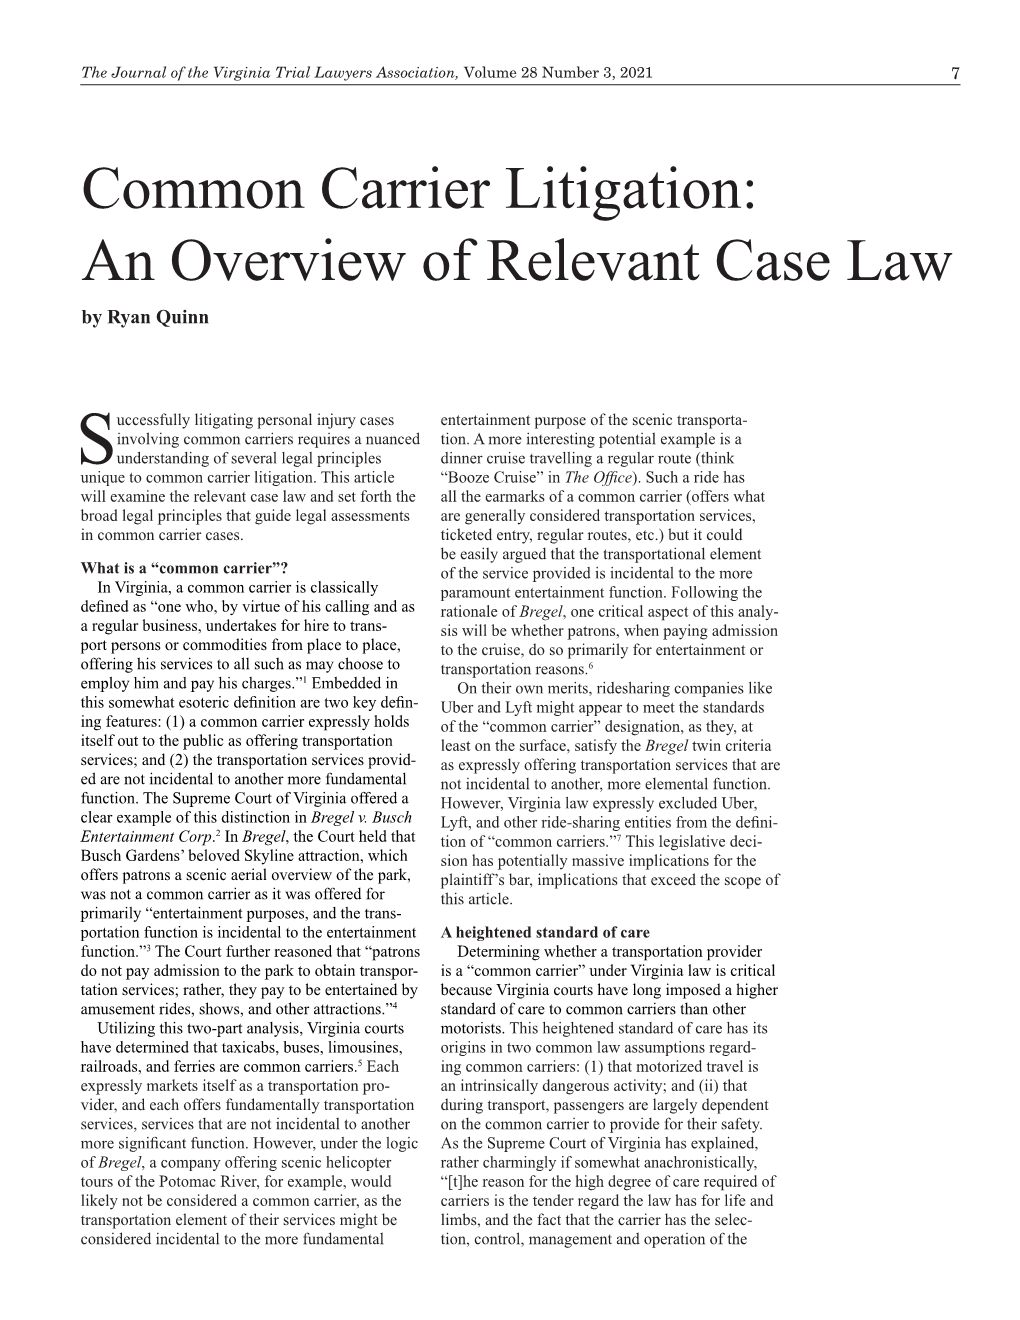 Common Carrier Litigation: an Overview of Relevant Case Law by Ryan Quinn